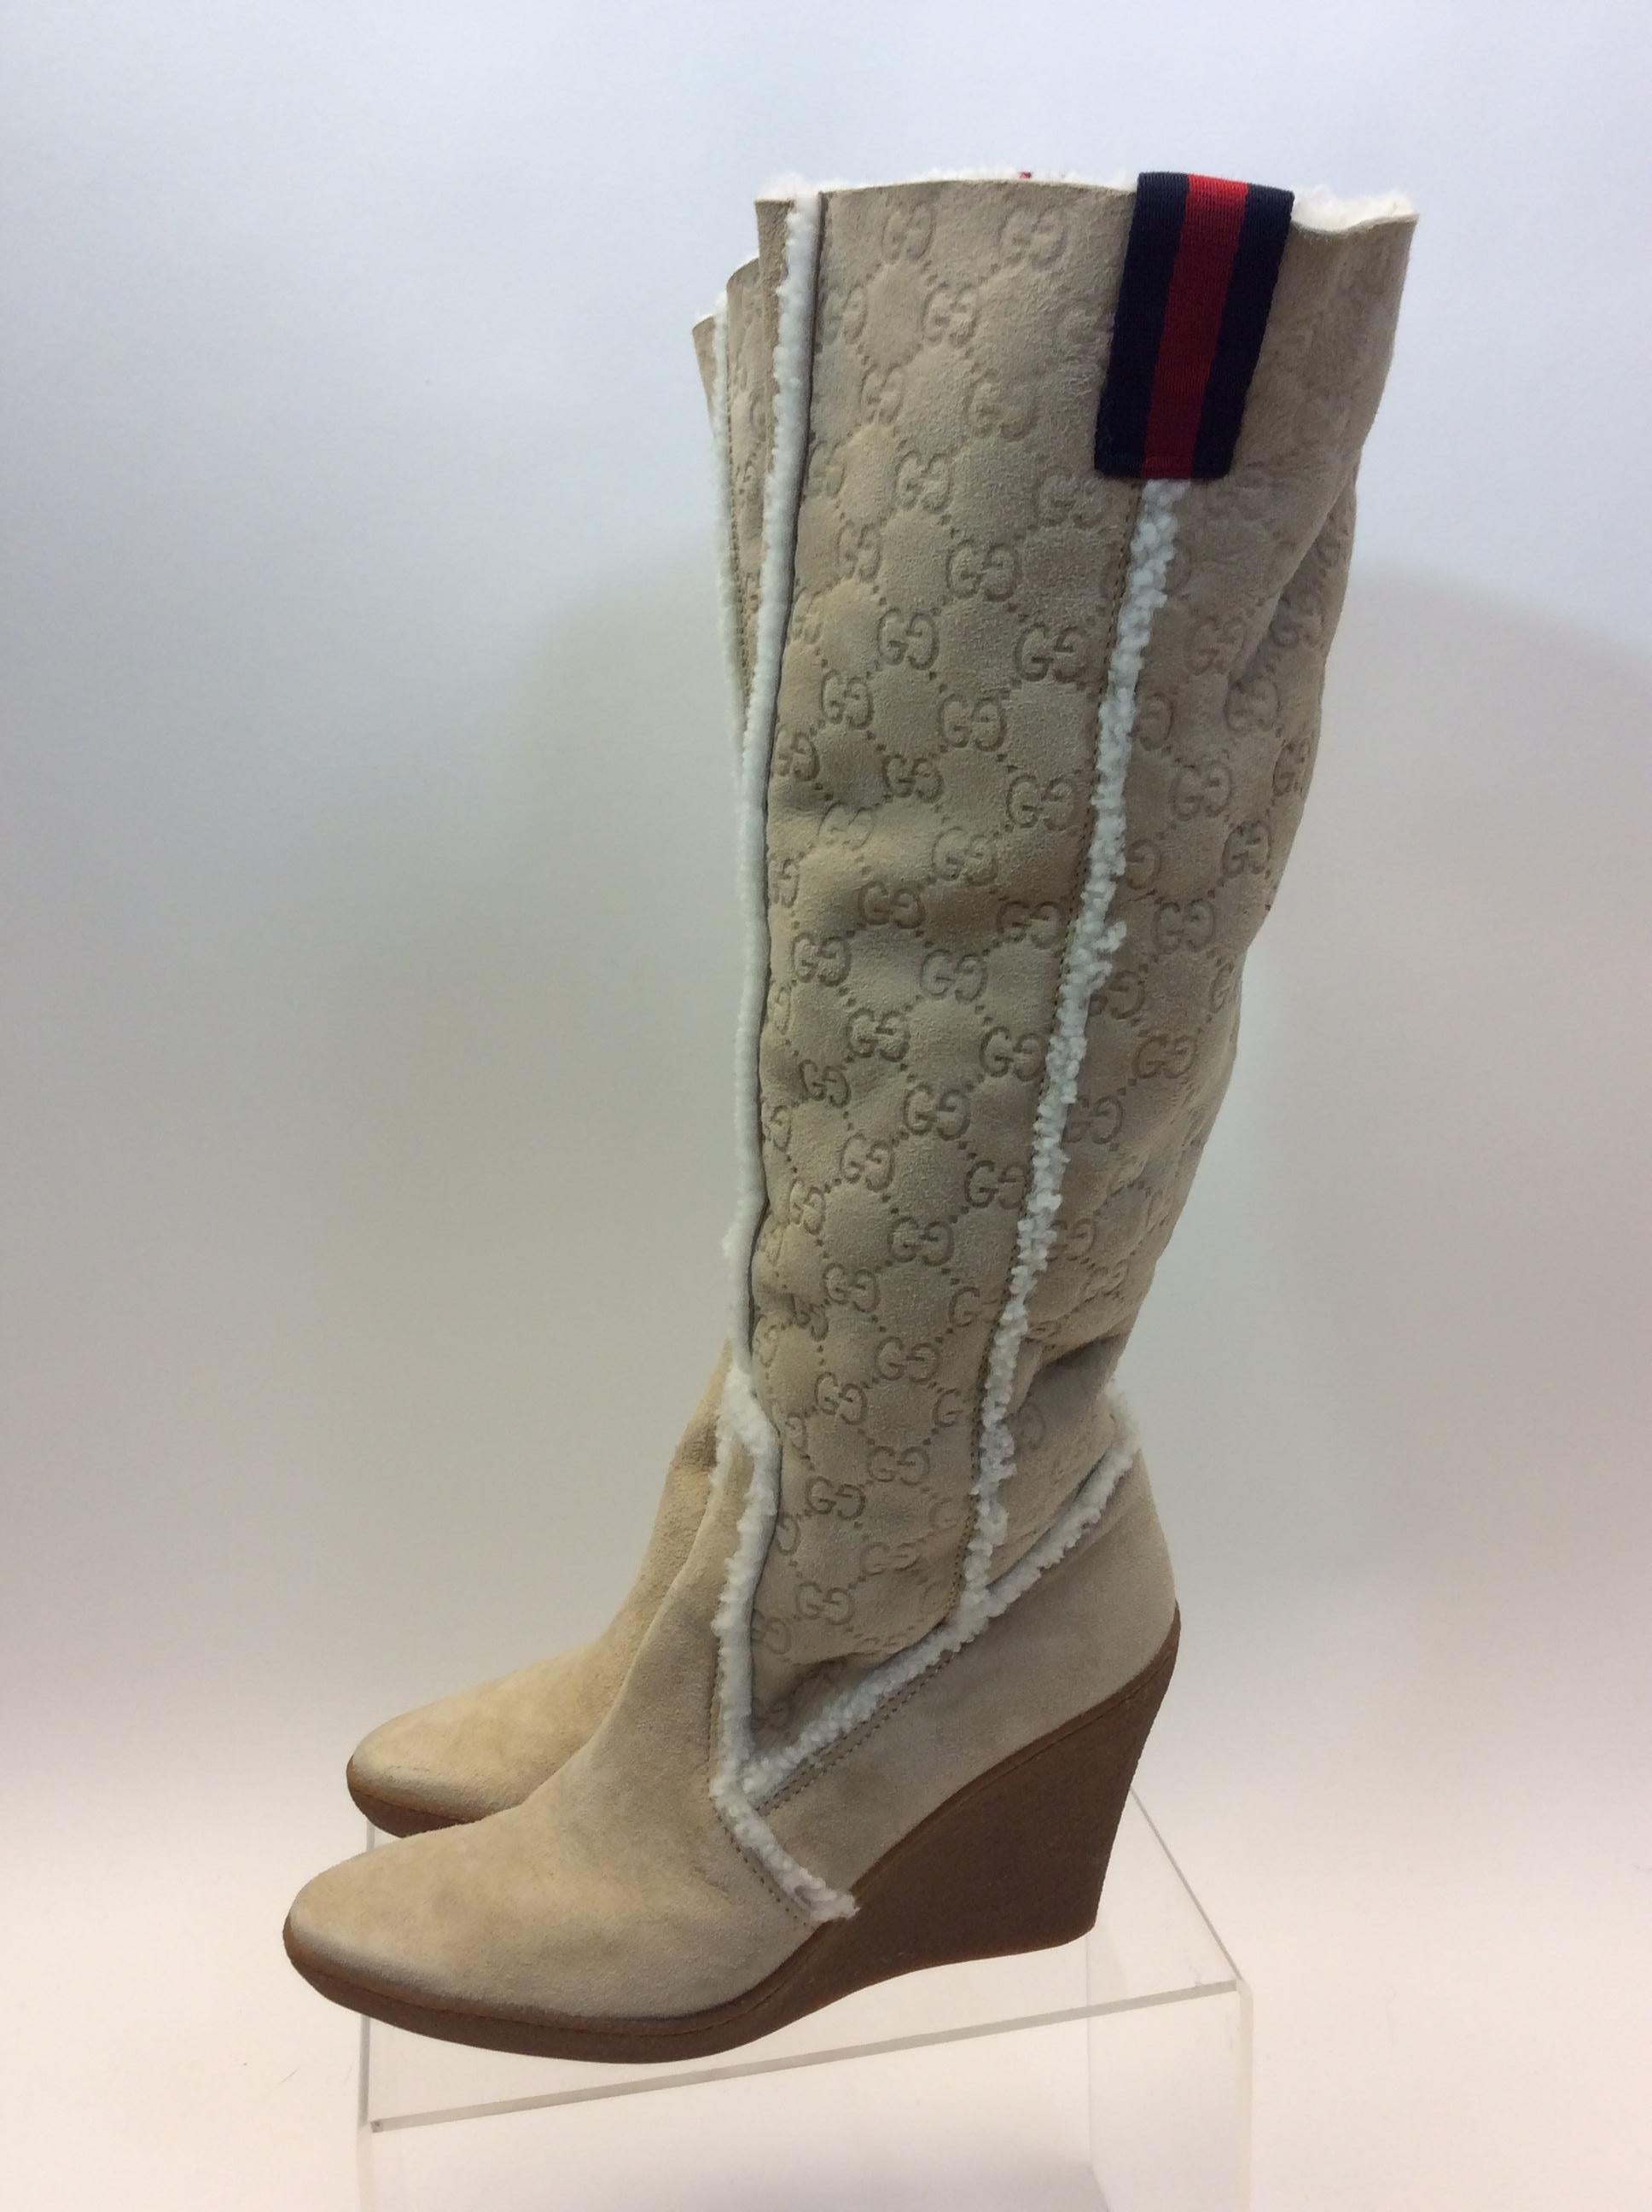 Gucci Tan Leather Wedged Boots
$399
Size 9.5
4” wedge
.75” platform
